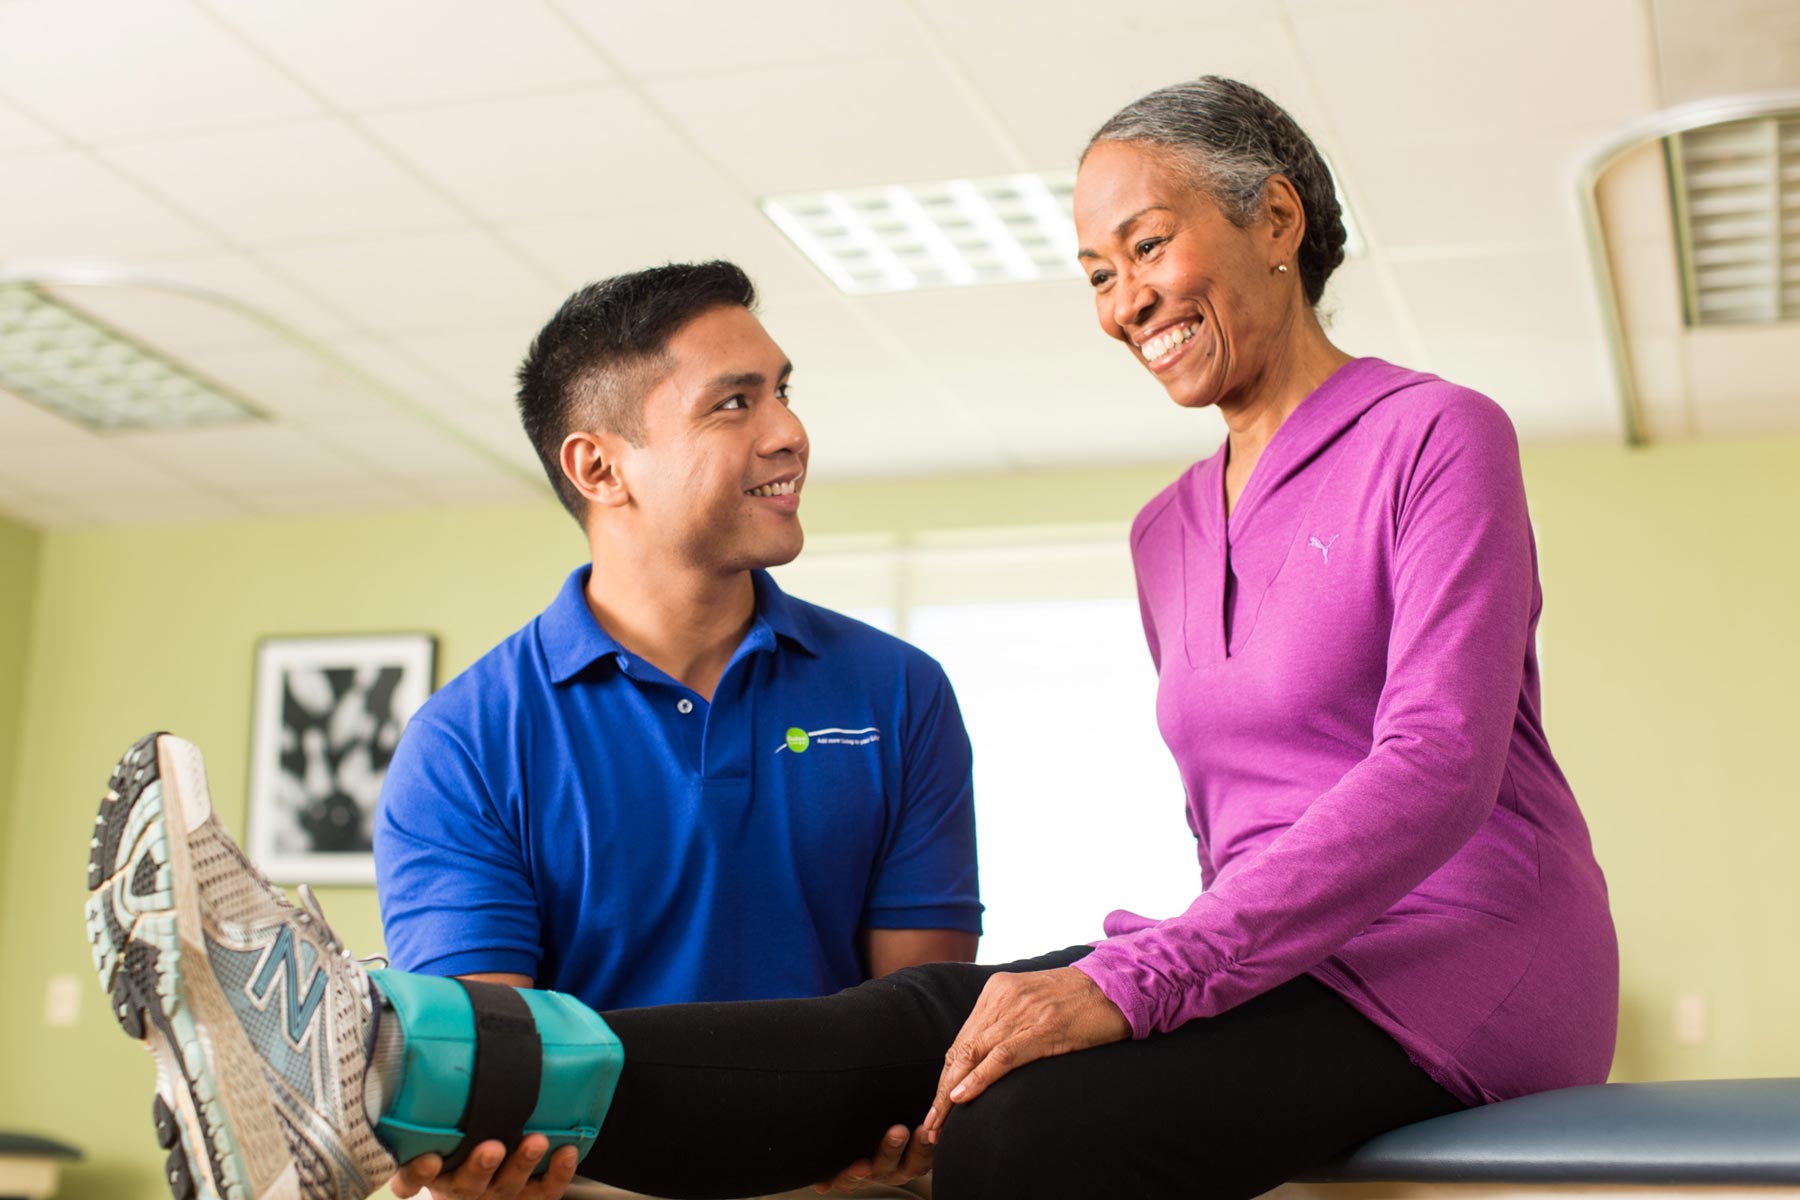 Therapist assisting patient with rehab exercises